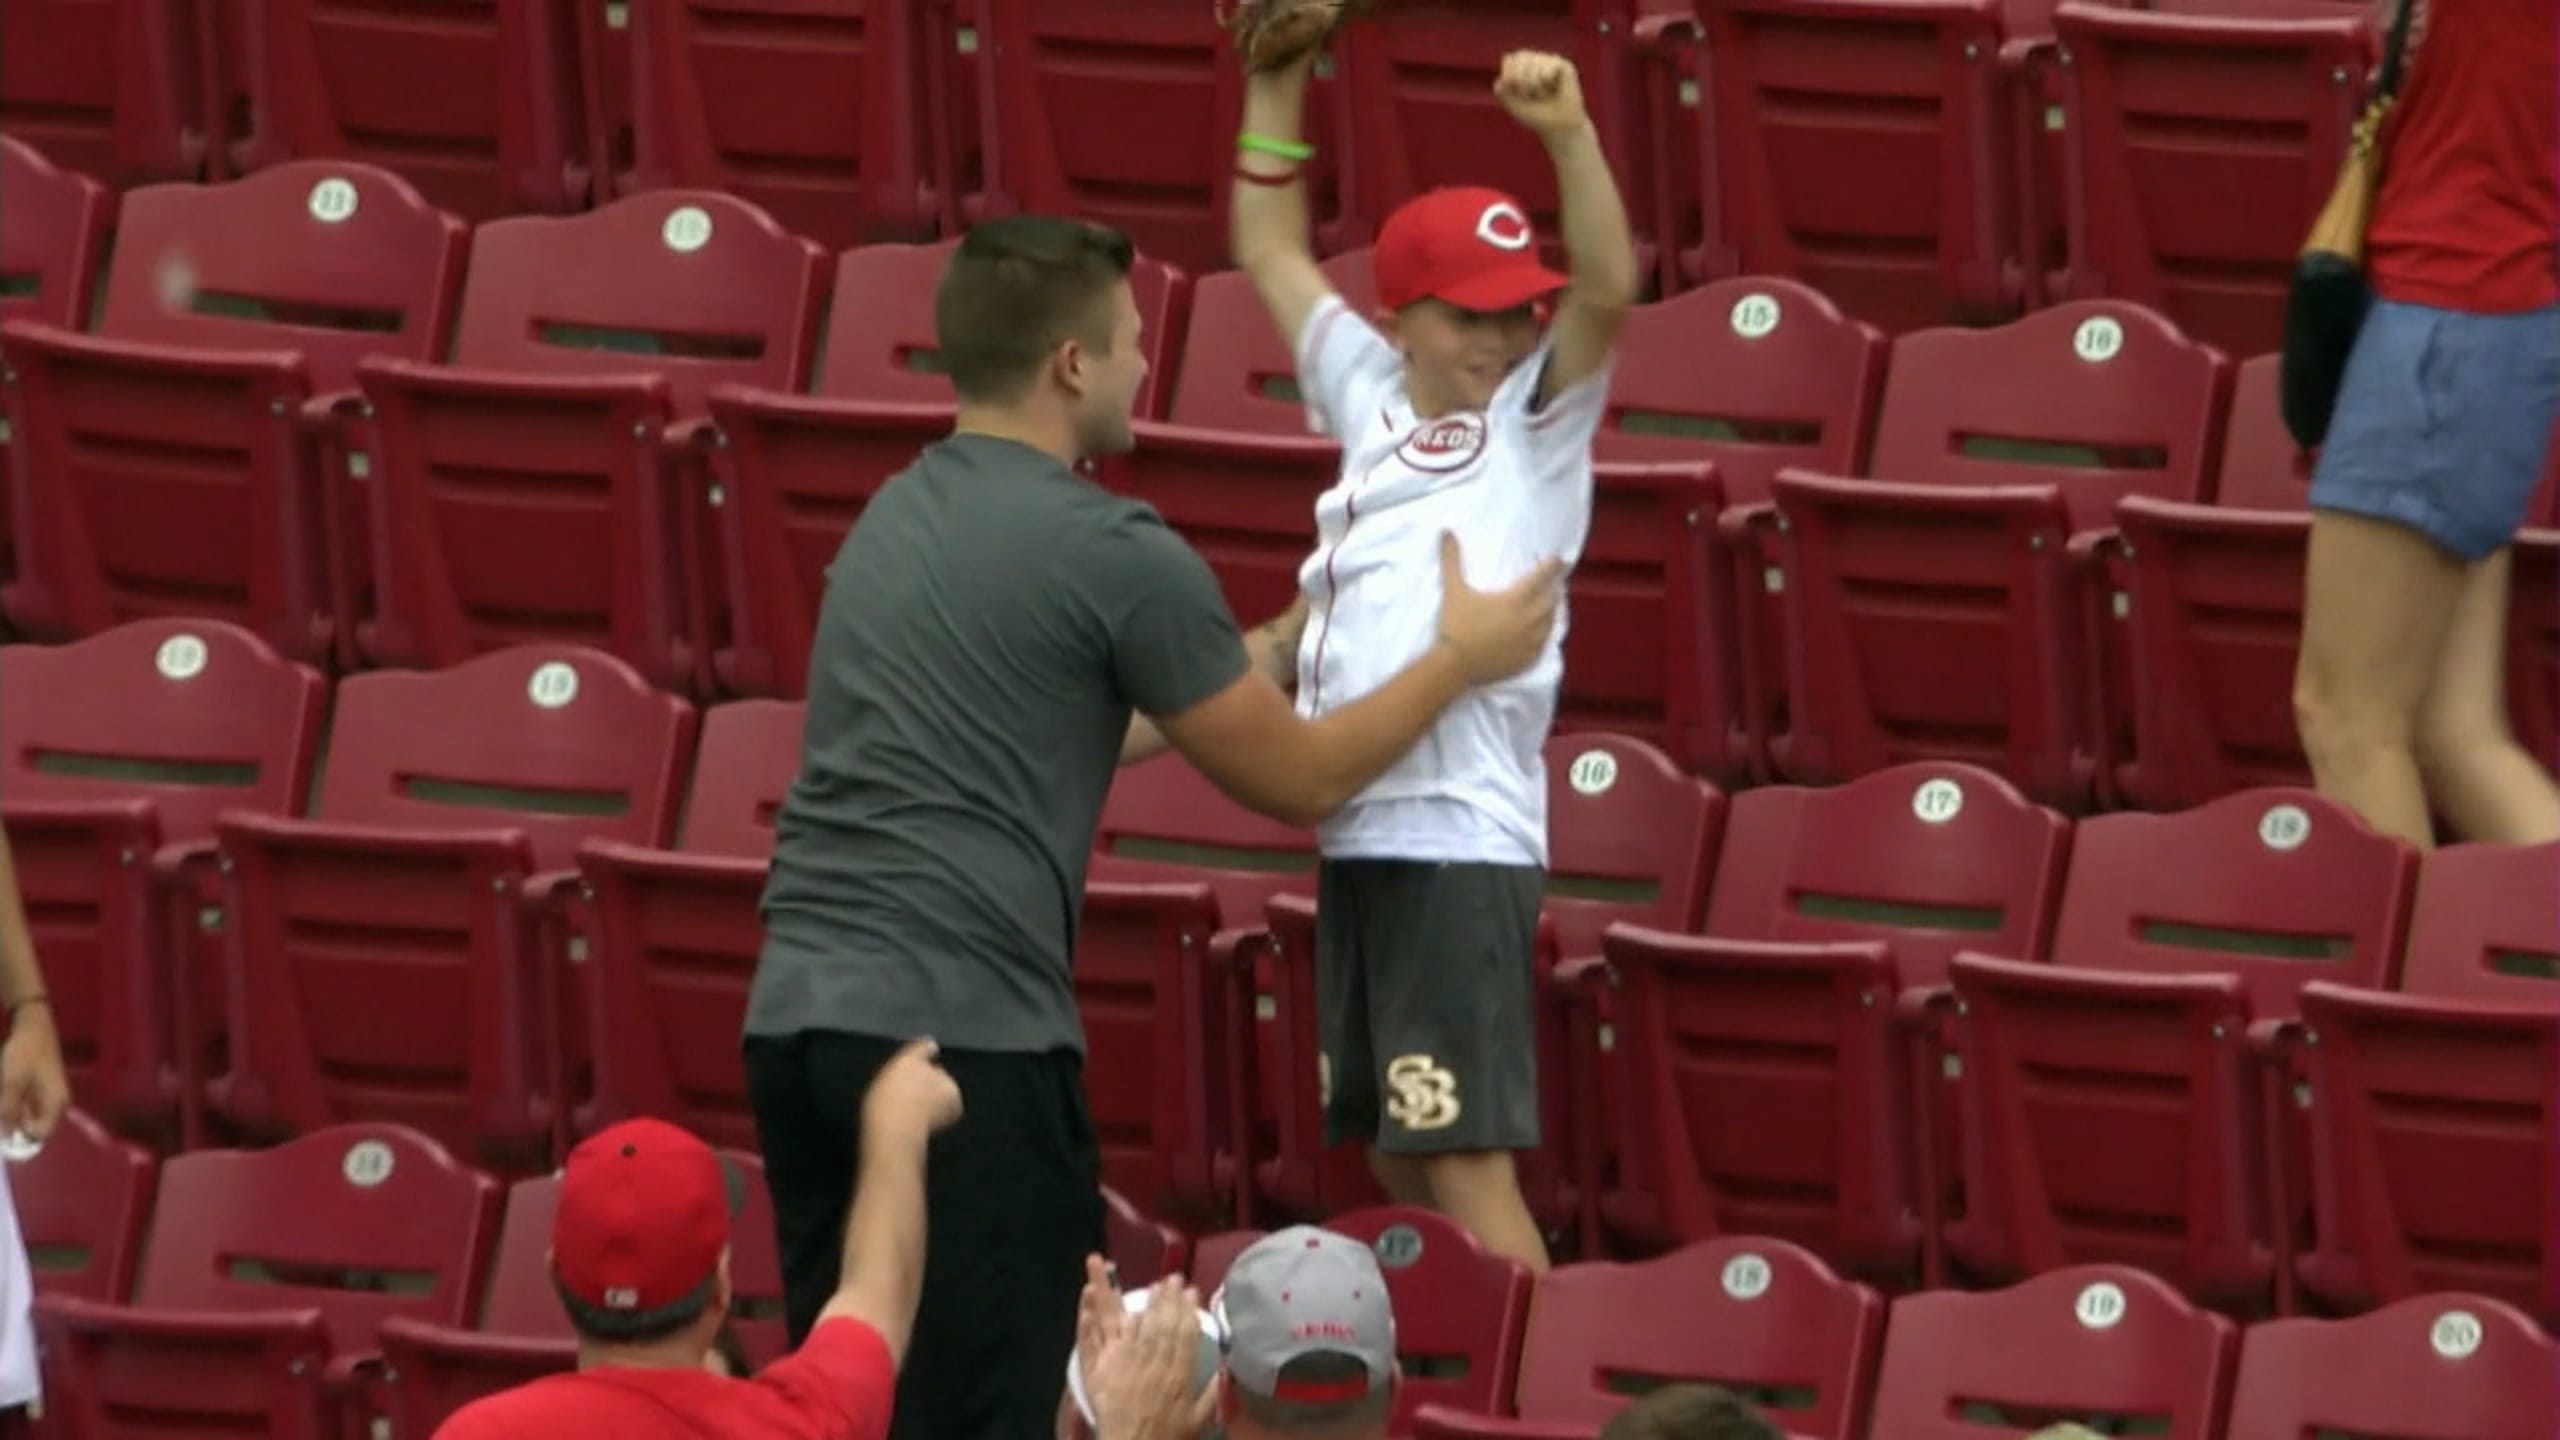 Young Reds fan sells out for home run ball, dives and secures Joey